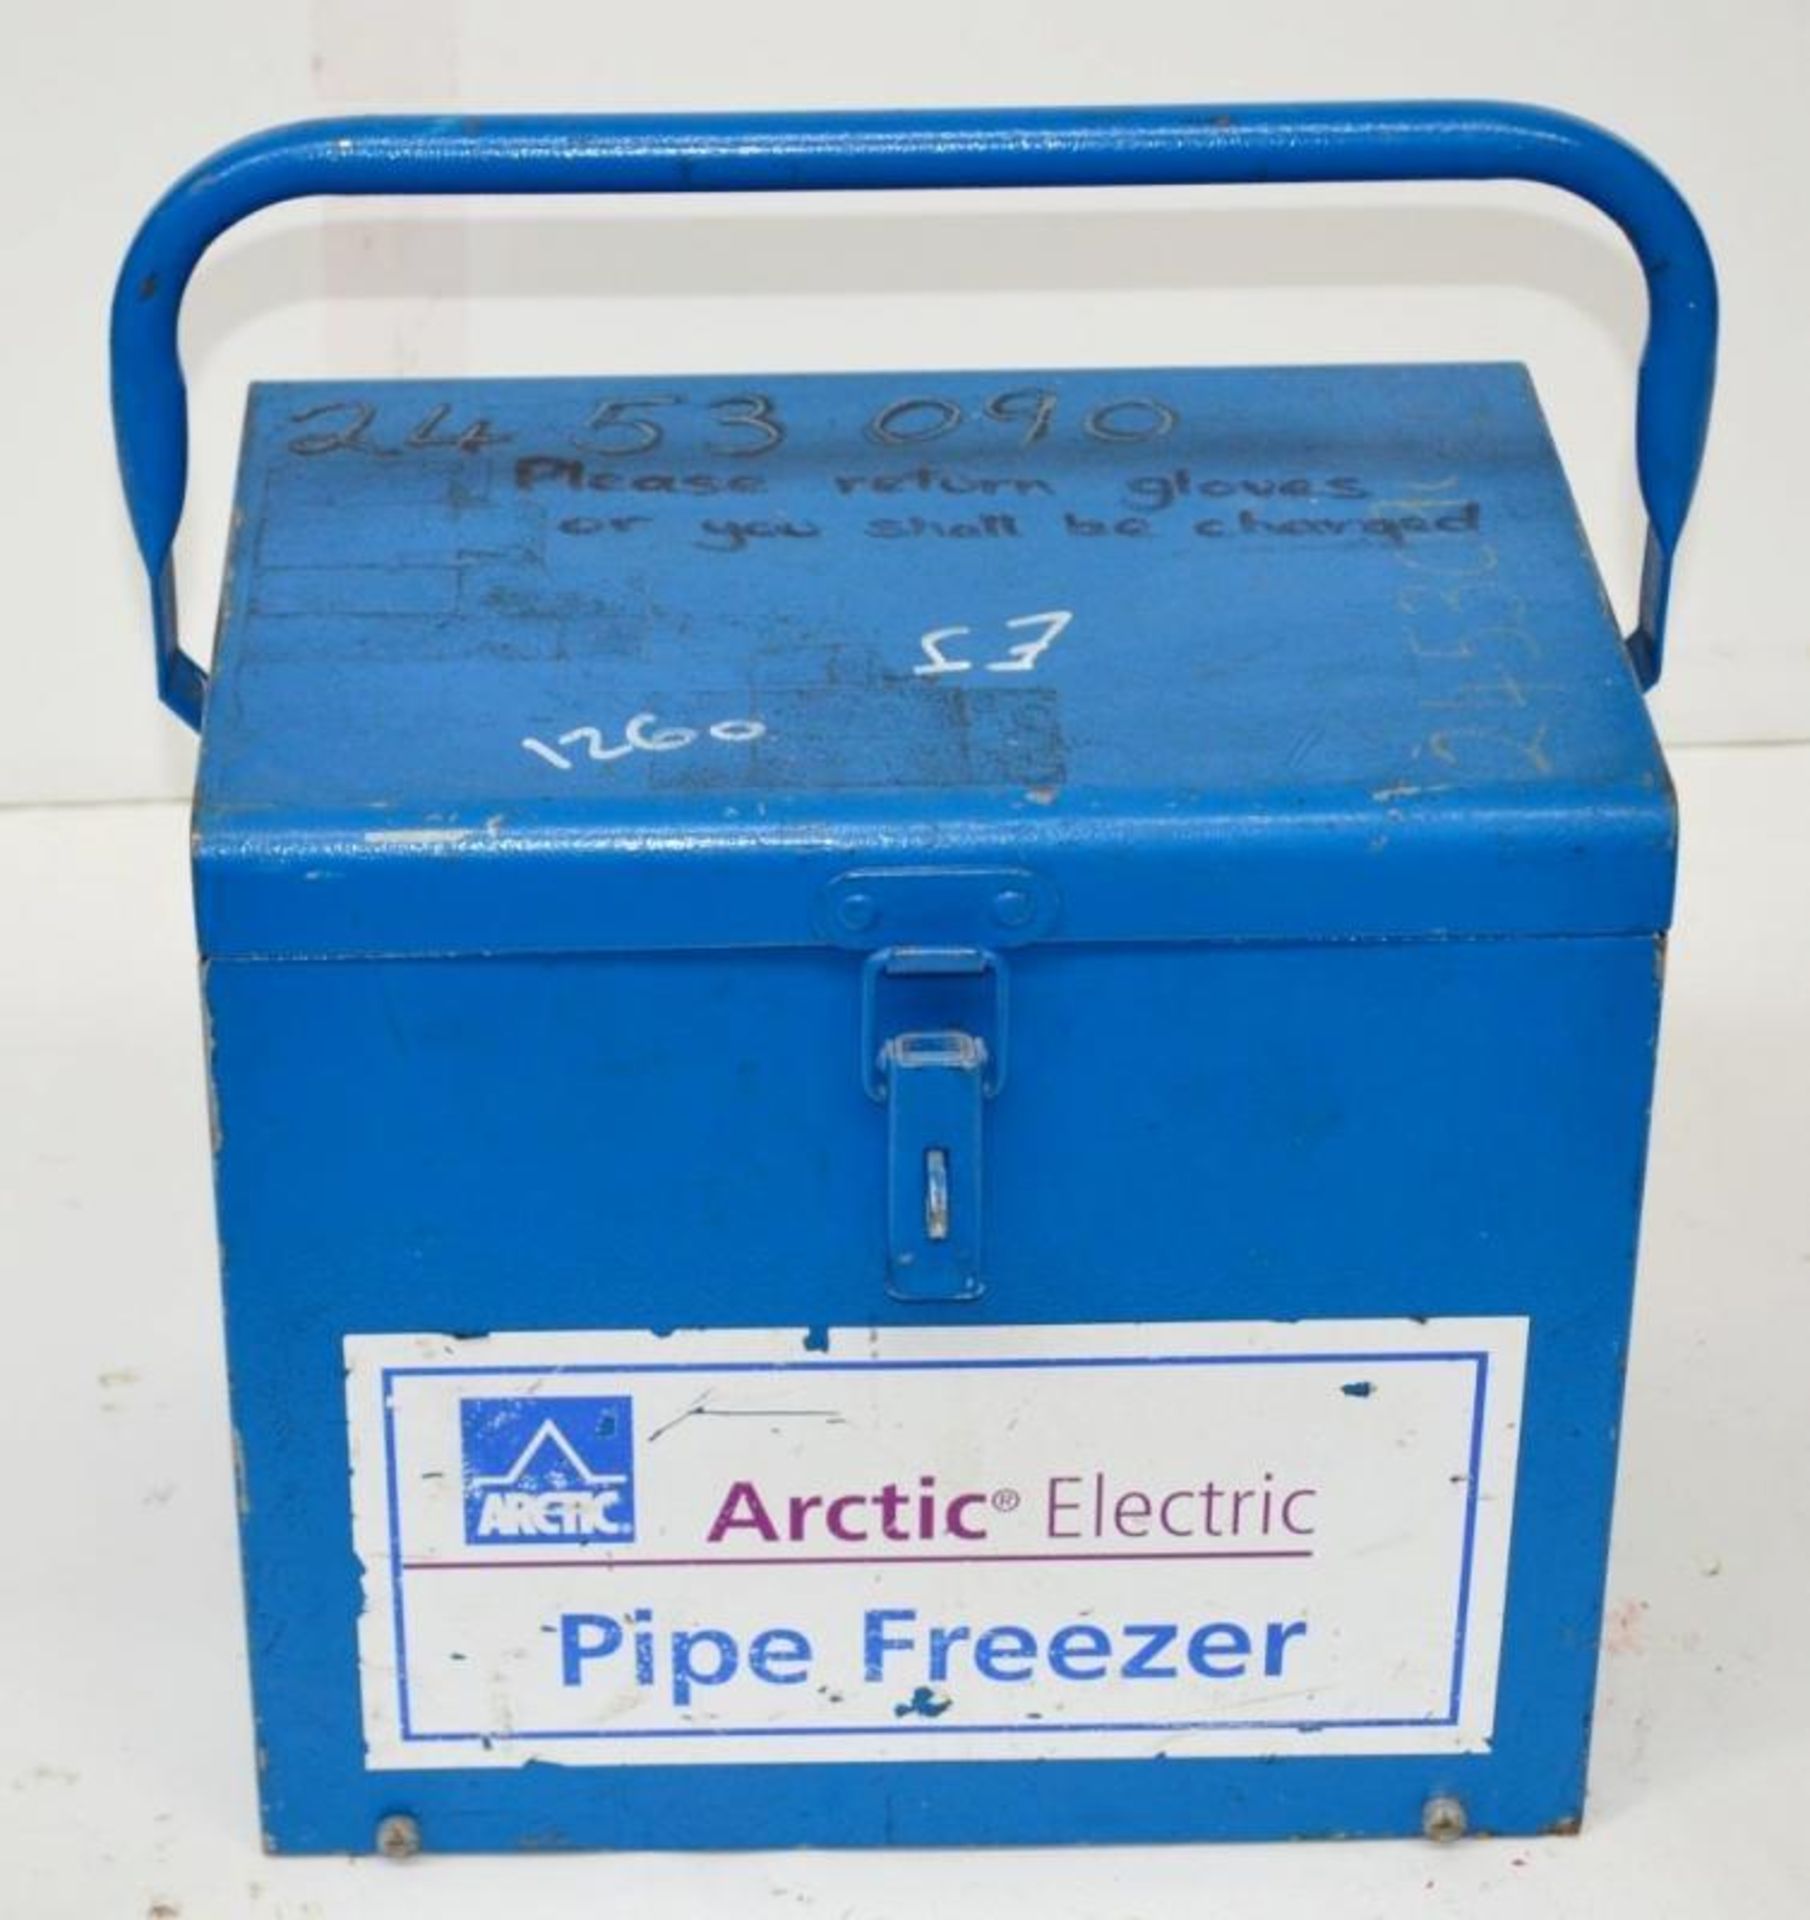 1 x Freeze Master Arctic Freeze Electric Pipe Freezer 110 volt - Used In Working Order - MWI014 -